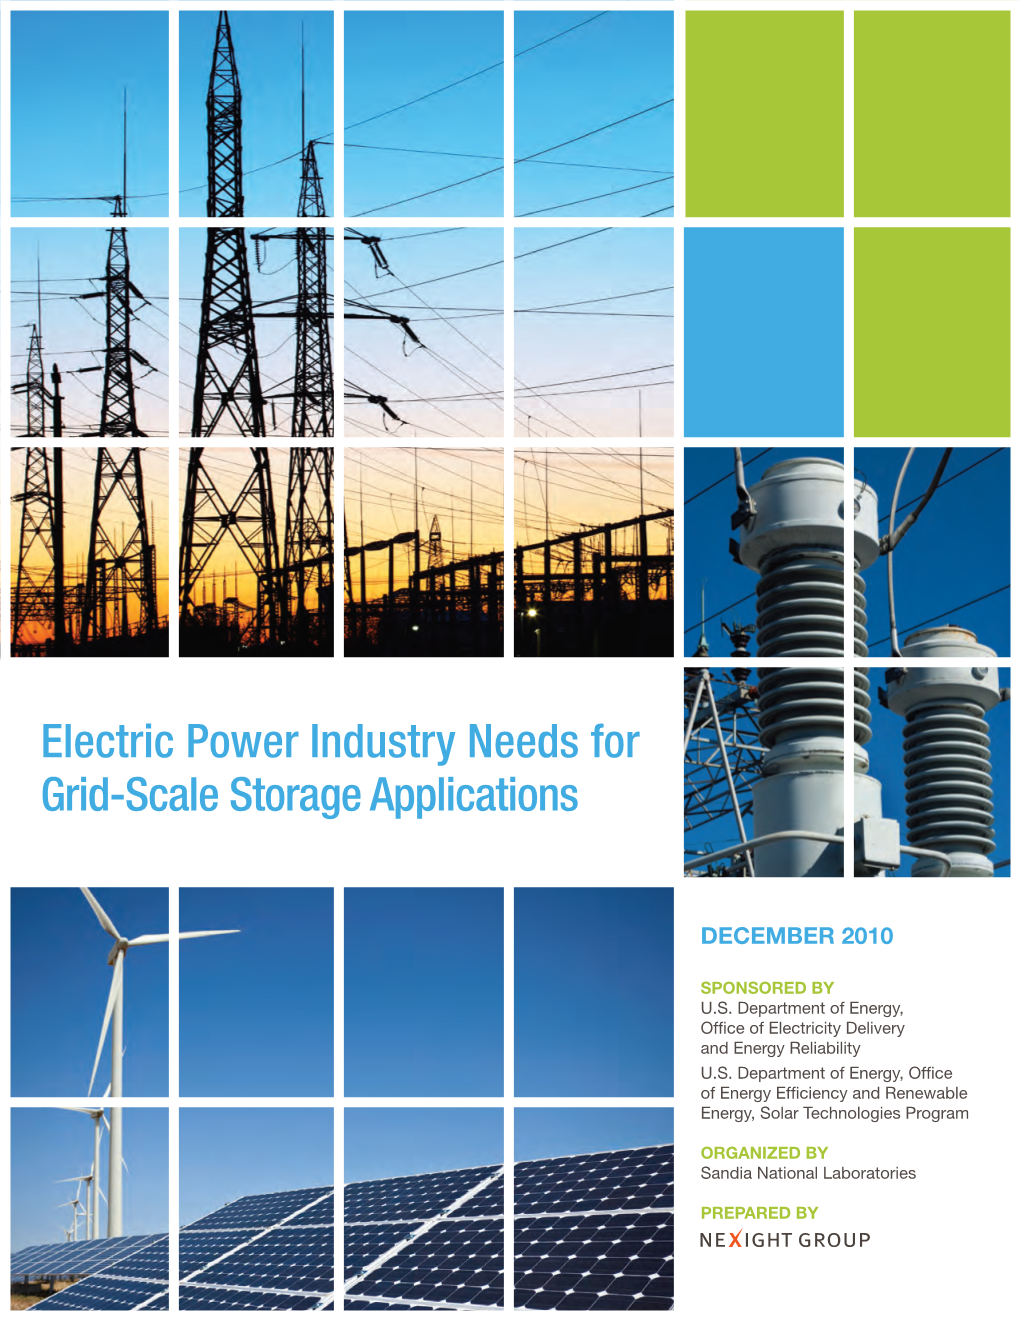 Electric Power Industry Needs for Grid-Scale Storage Applications